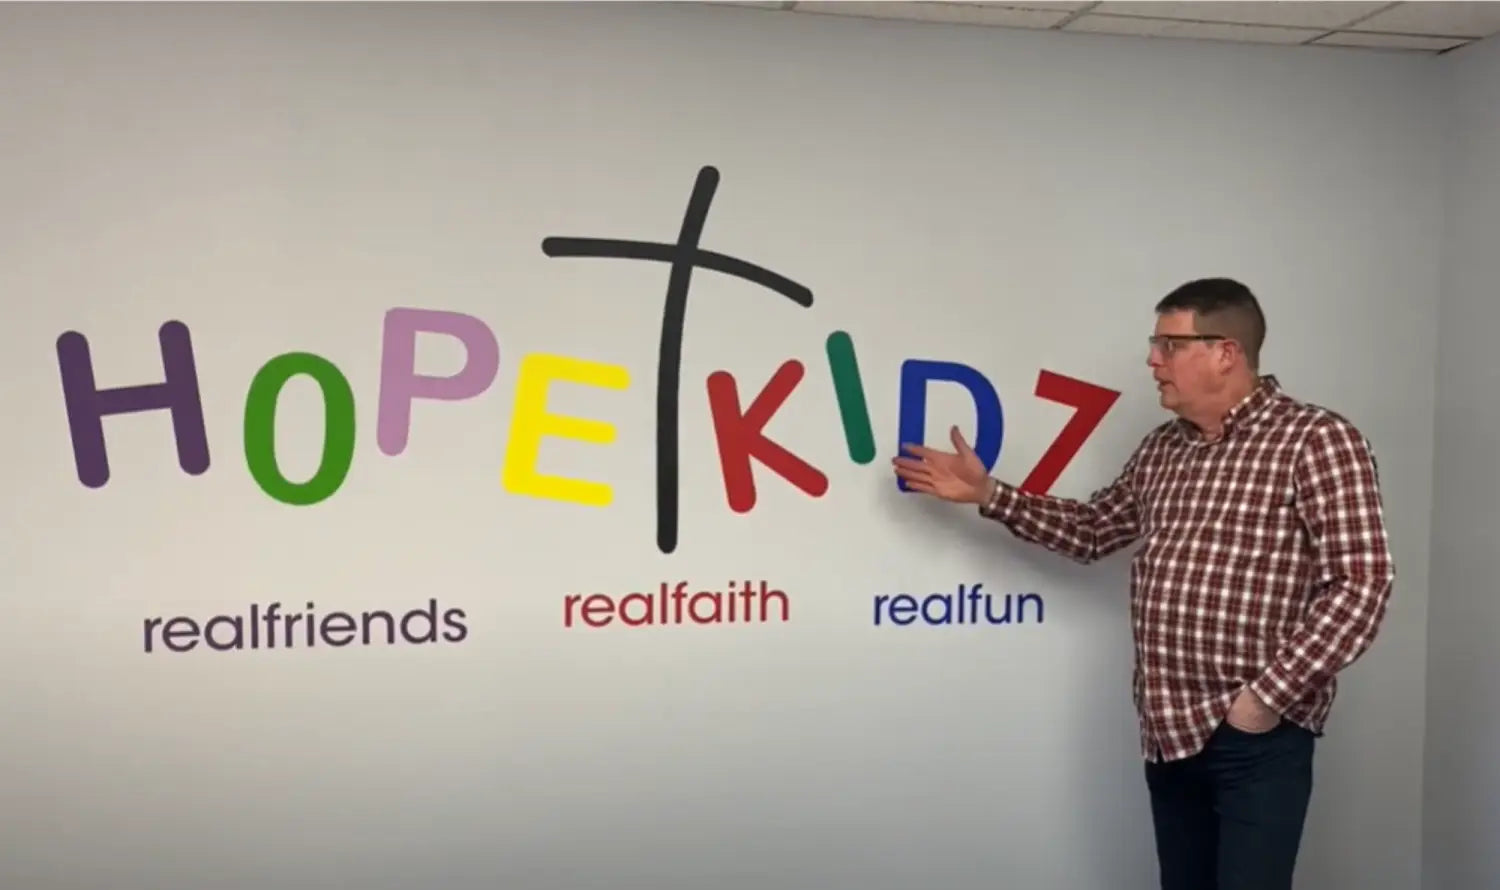 Picture of Church Nursery Wall Decor created using wall decals by The Simple Stencil - Colorful, easy to install custom wall art is the perfect DIY Signage solution for churches, schools and businesses!